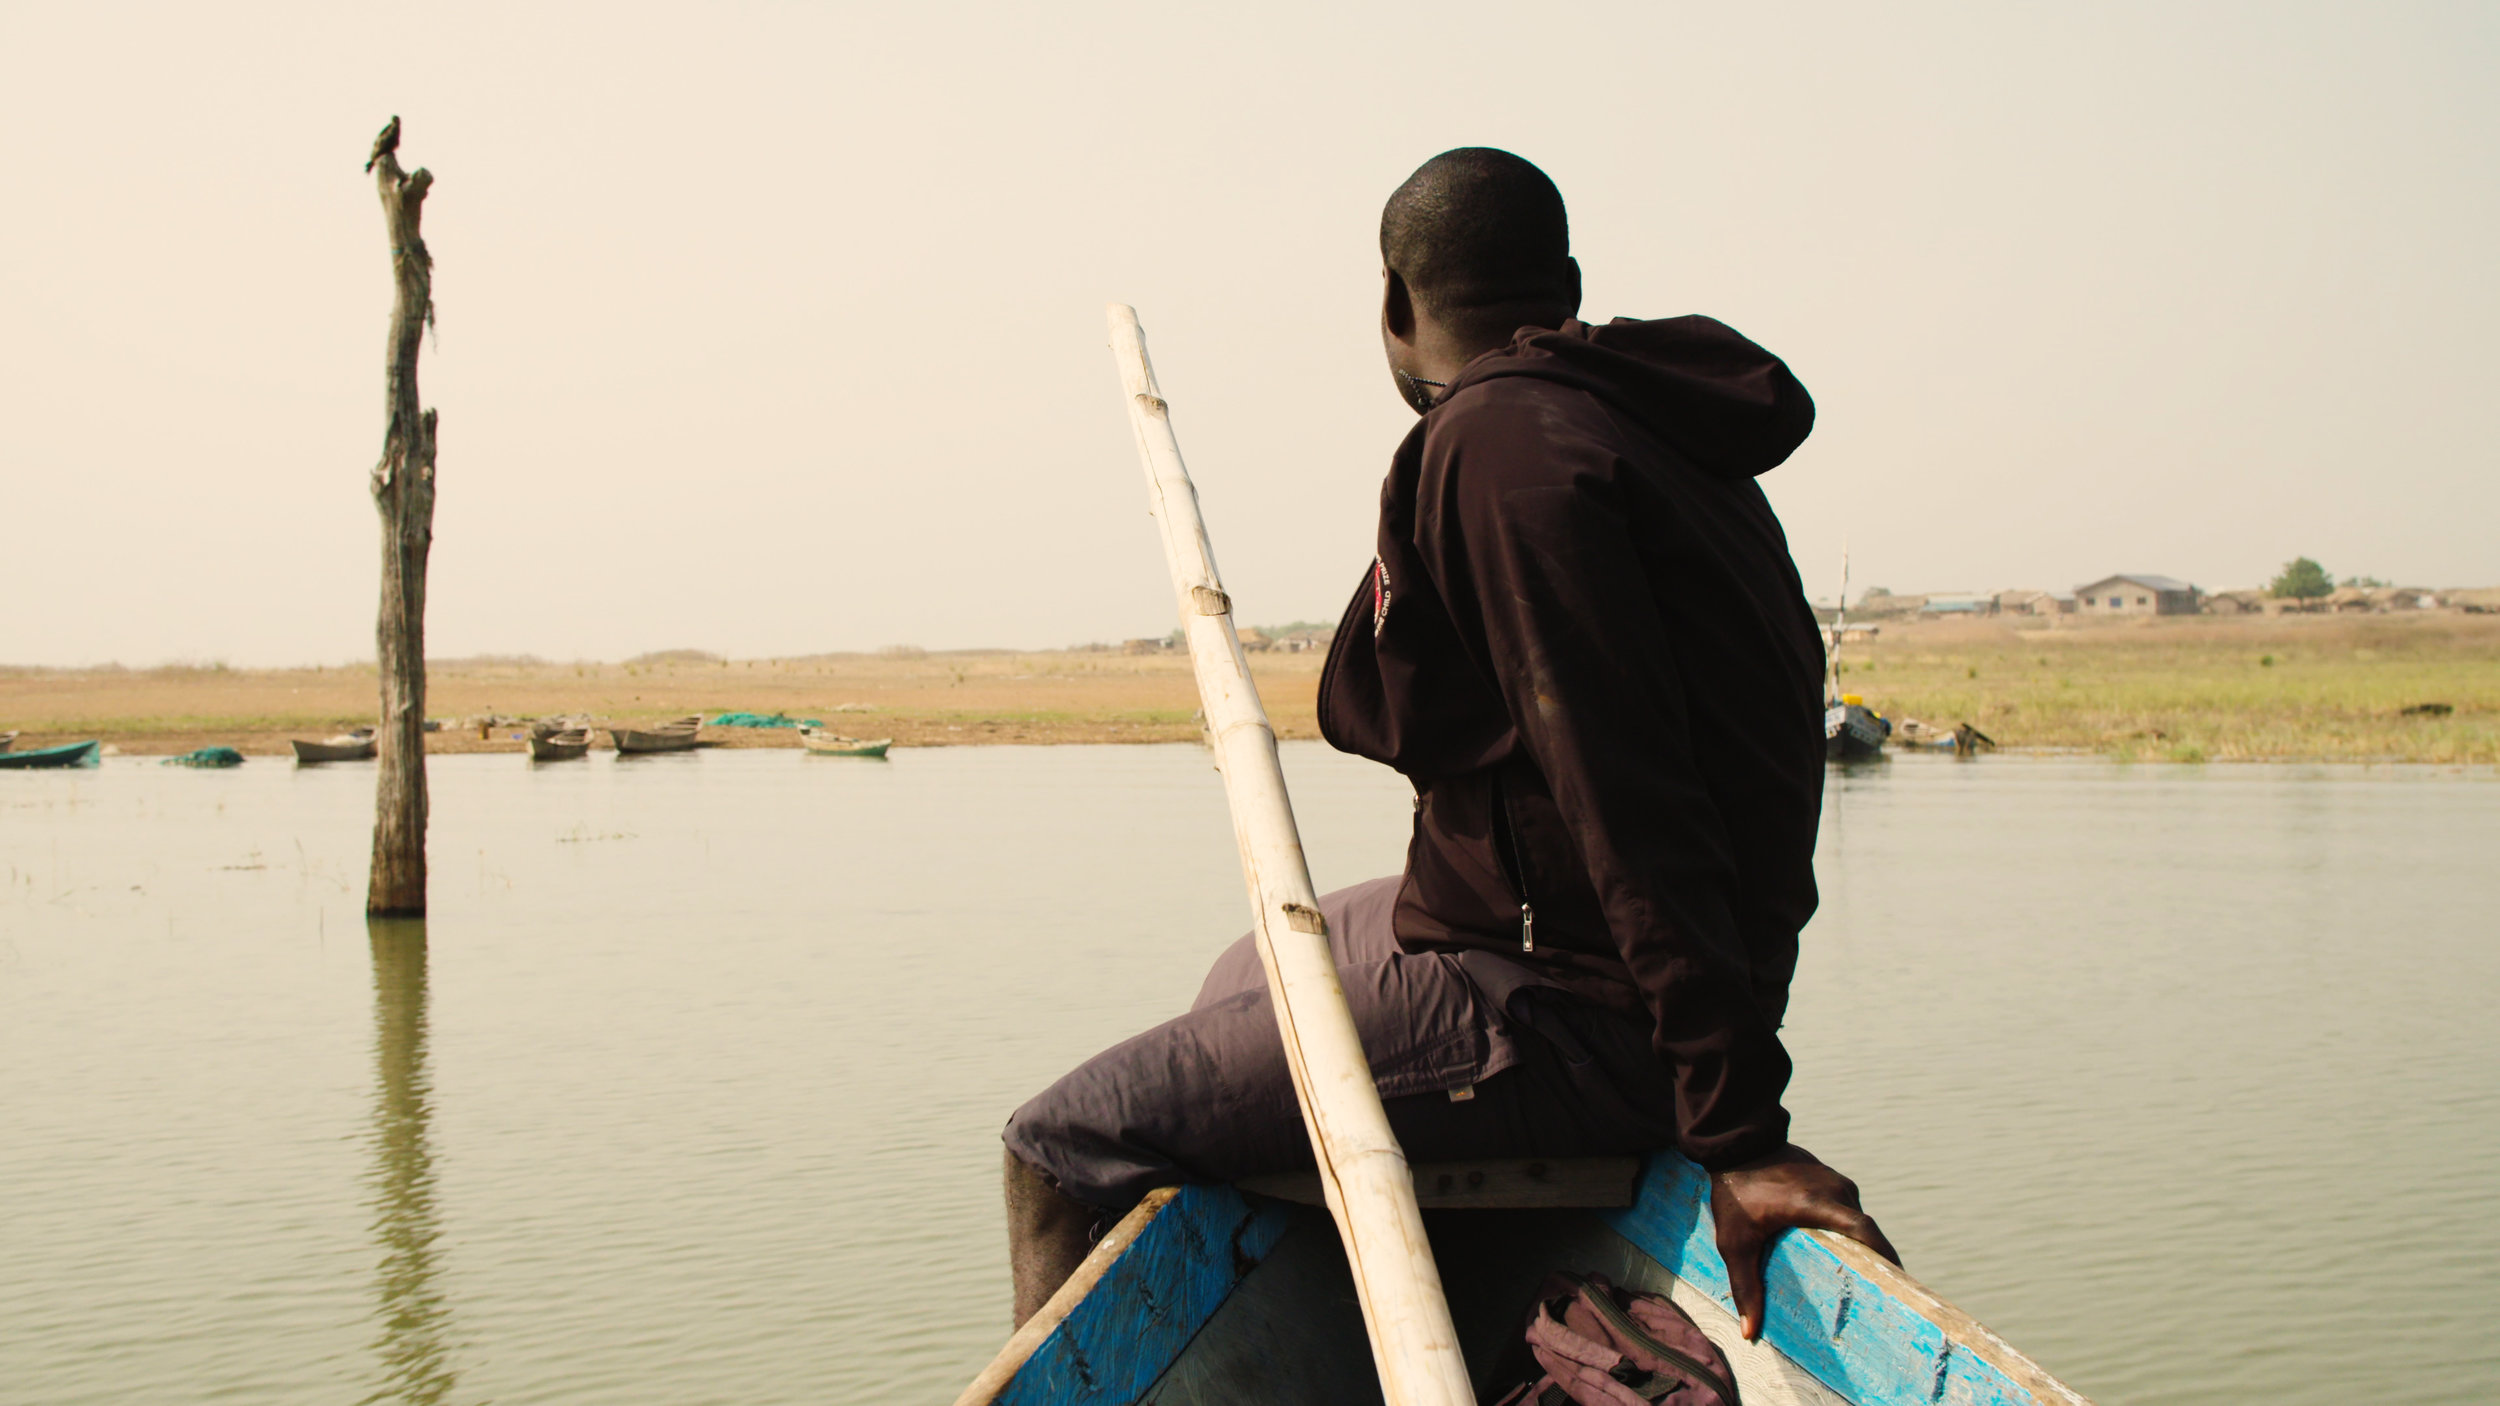 Kwame on rescue boat approaching shore.jpg